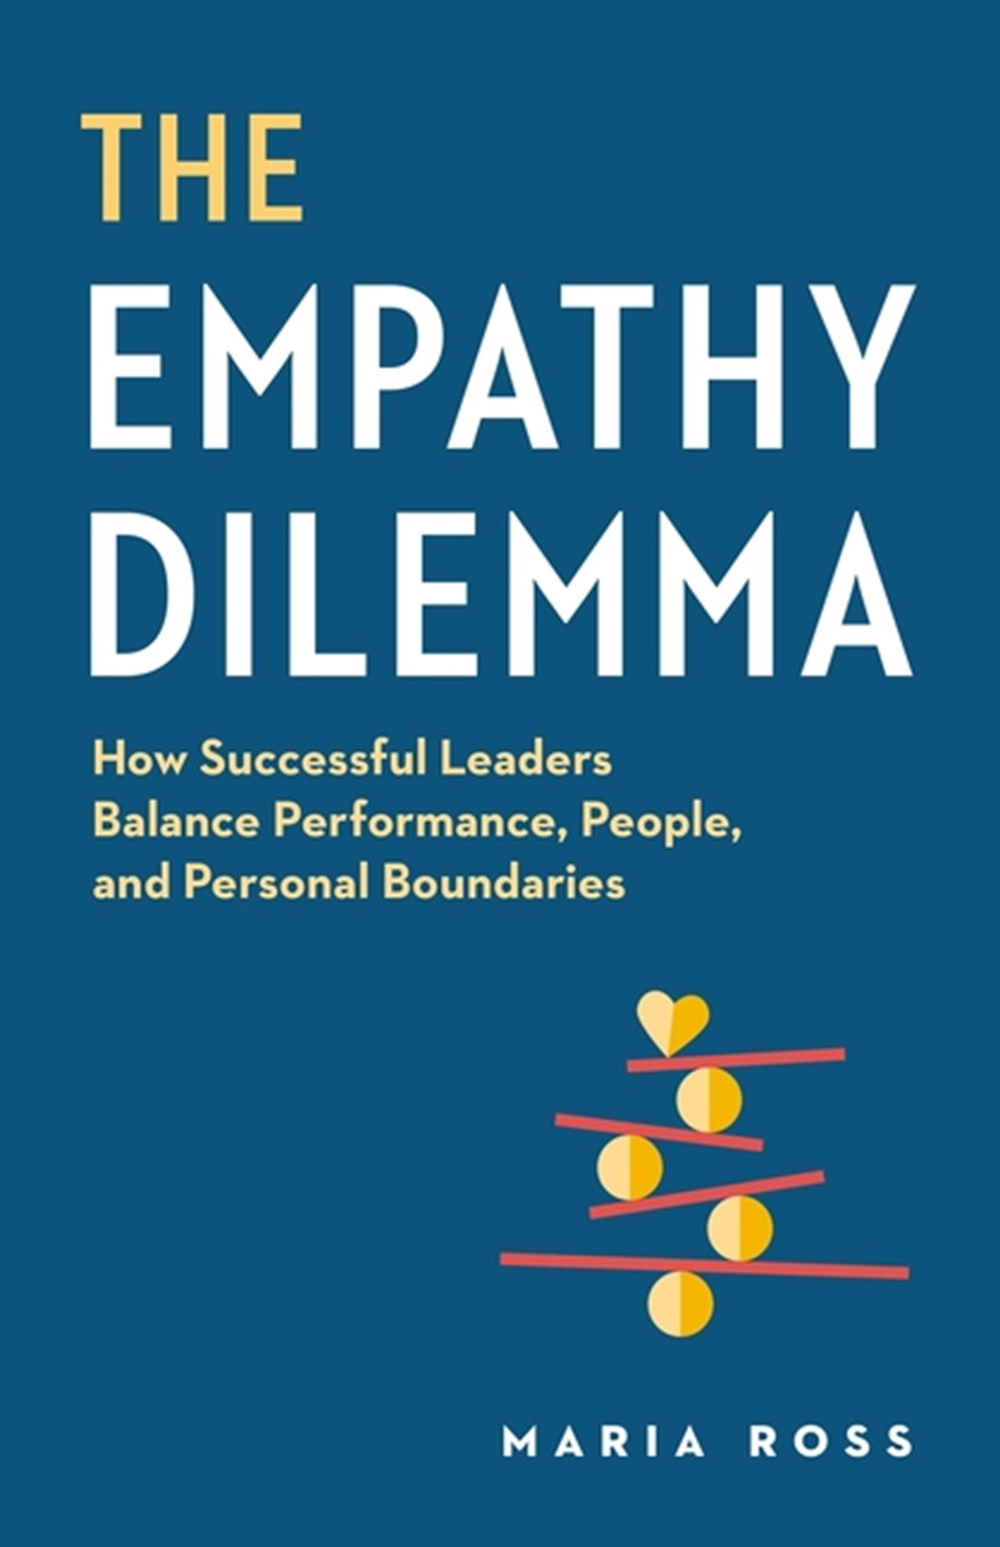 Empathy Dilemma: How Successful Leaders Balance Performance, People, and Personal Boundaries